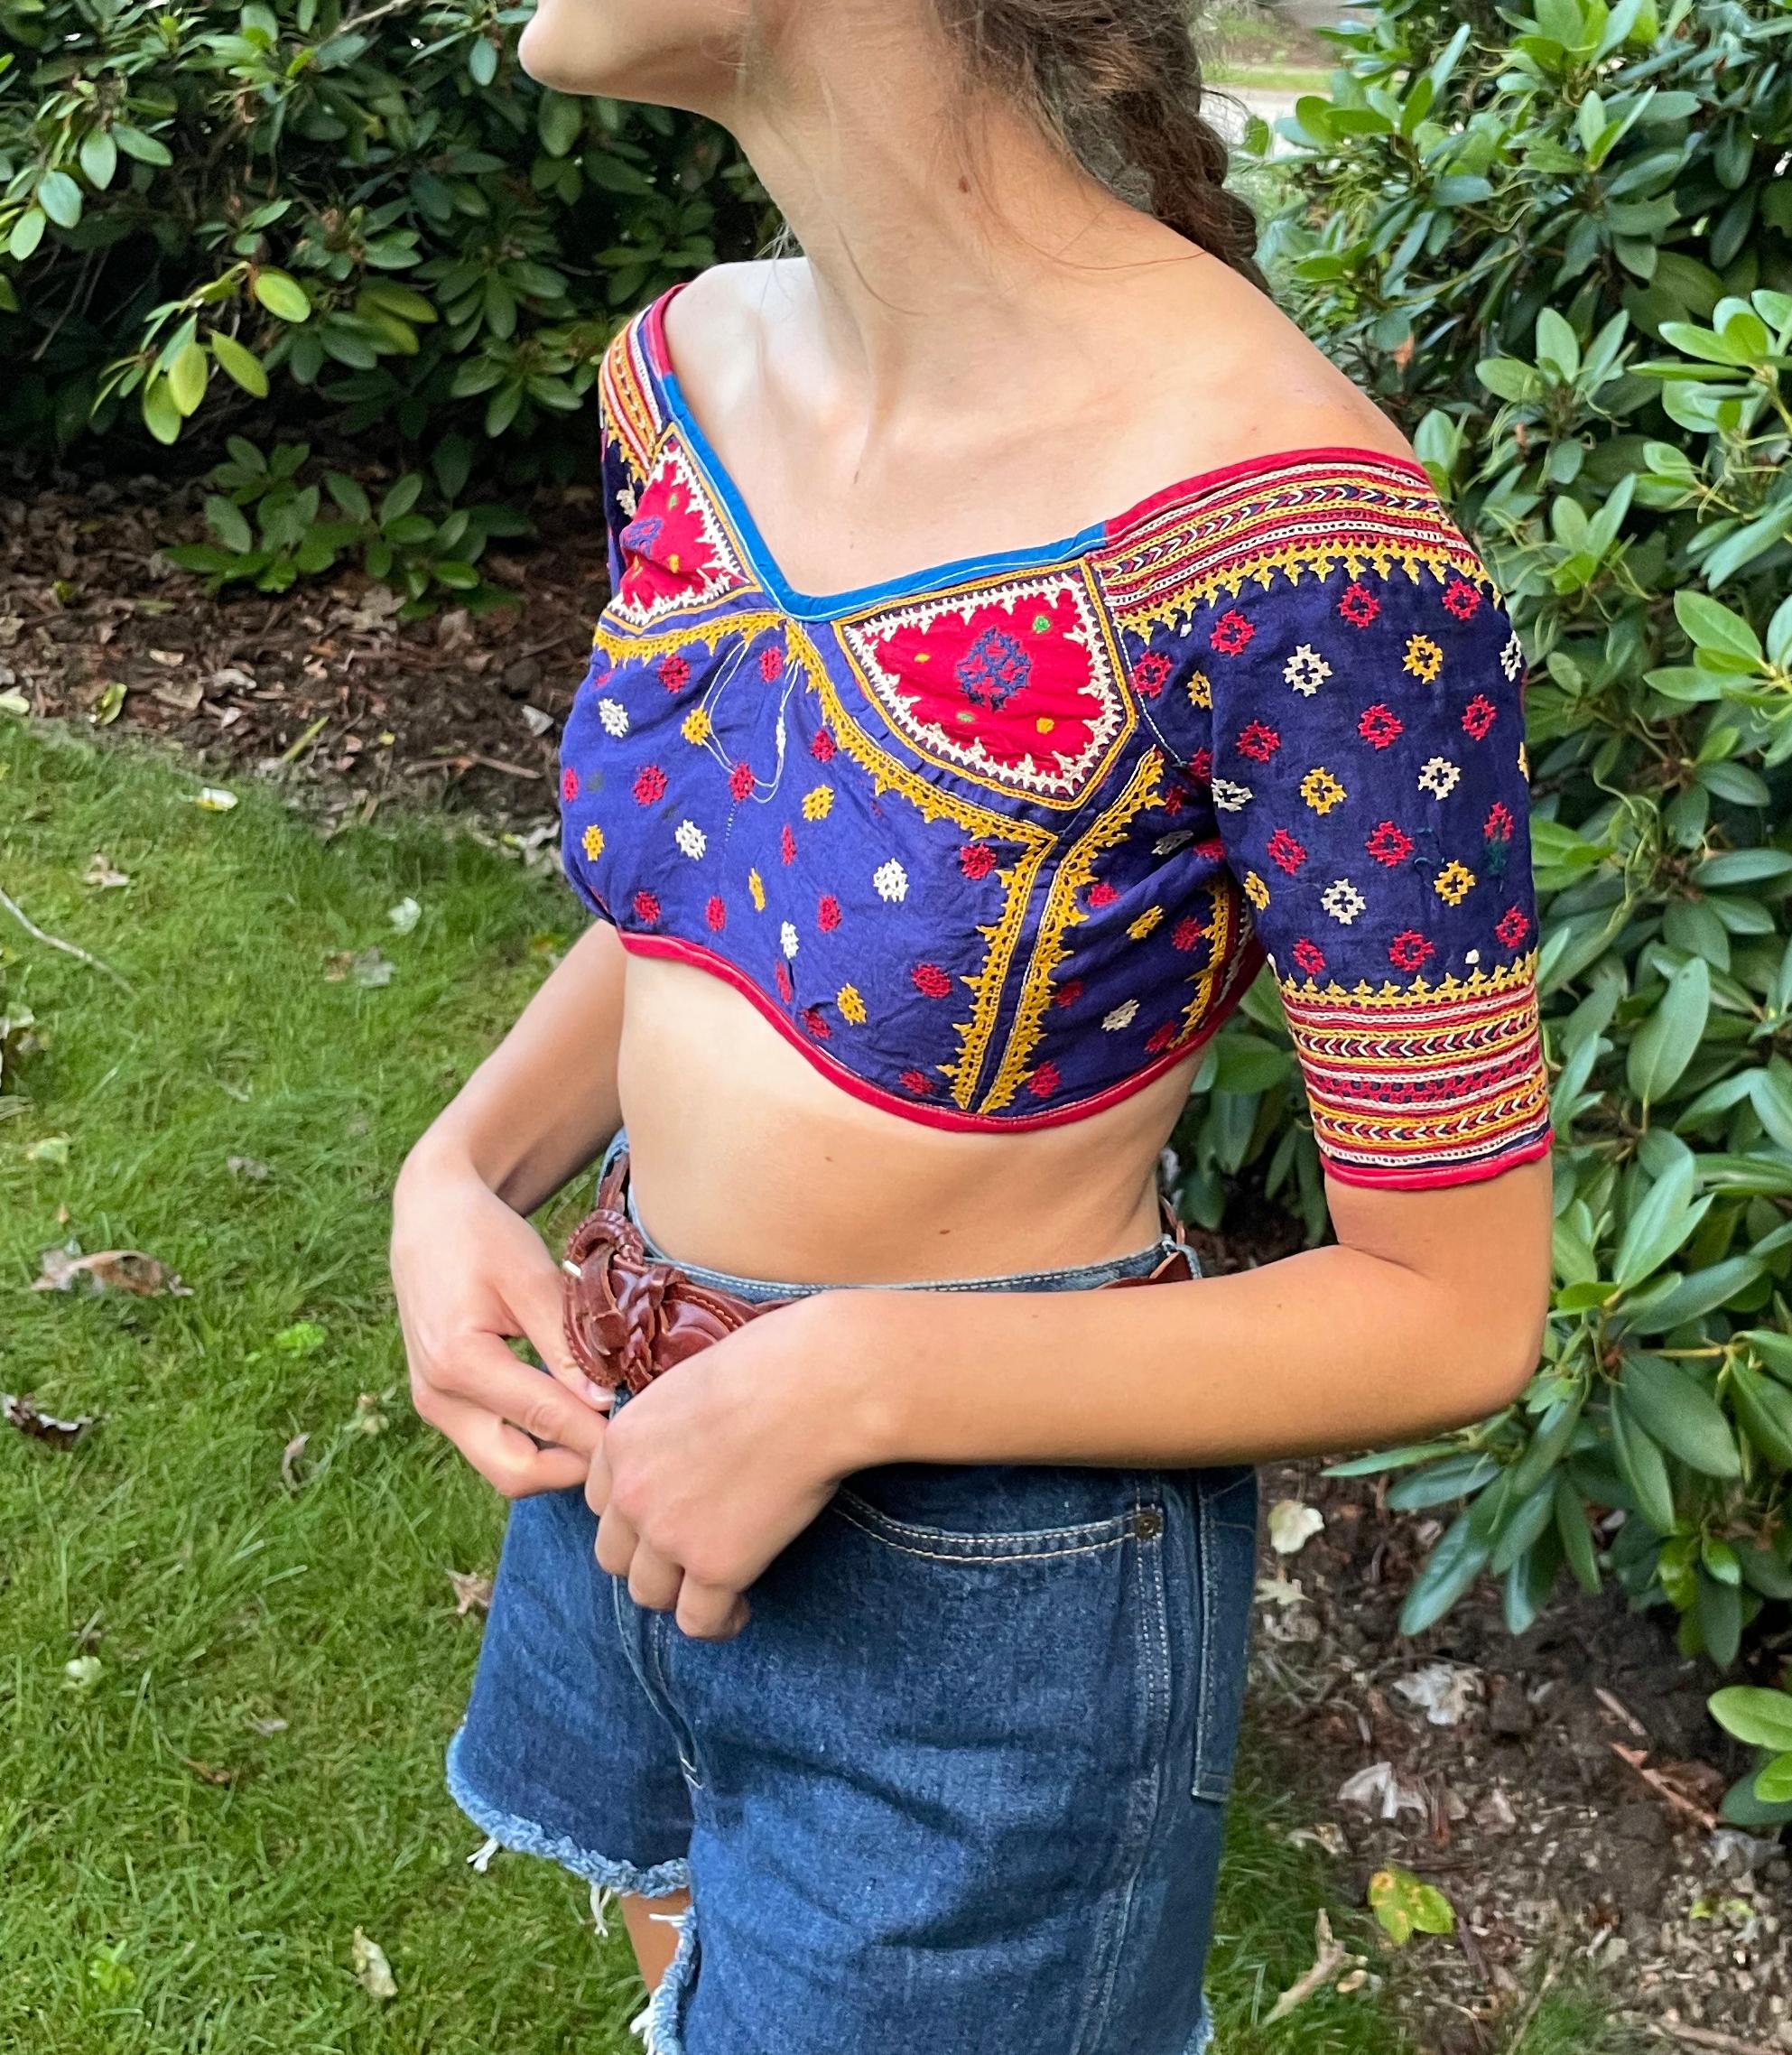 These vintage embroidered choli tops are incredibly rare and special: their ages range from the early to mid 20th Century, and all of them were embroidered by hand by the Rabari people in what is now Northwest India. The Rabari people are an ethnic